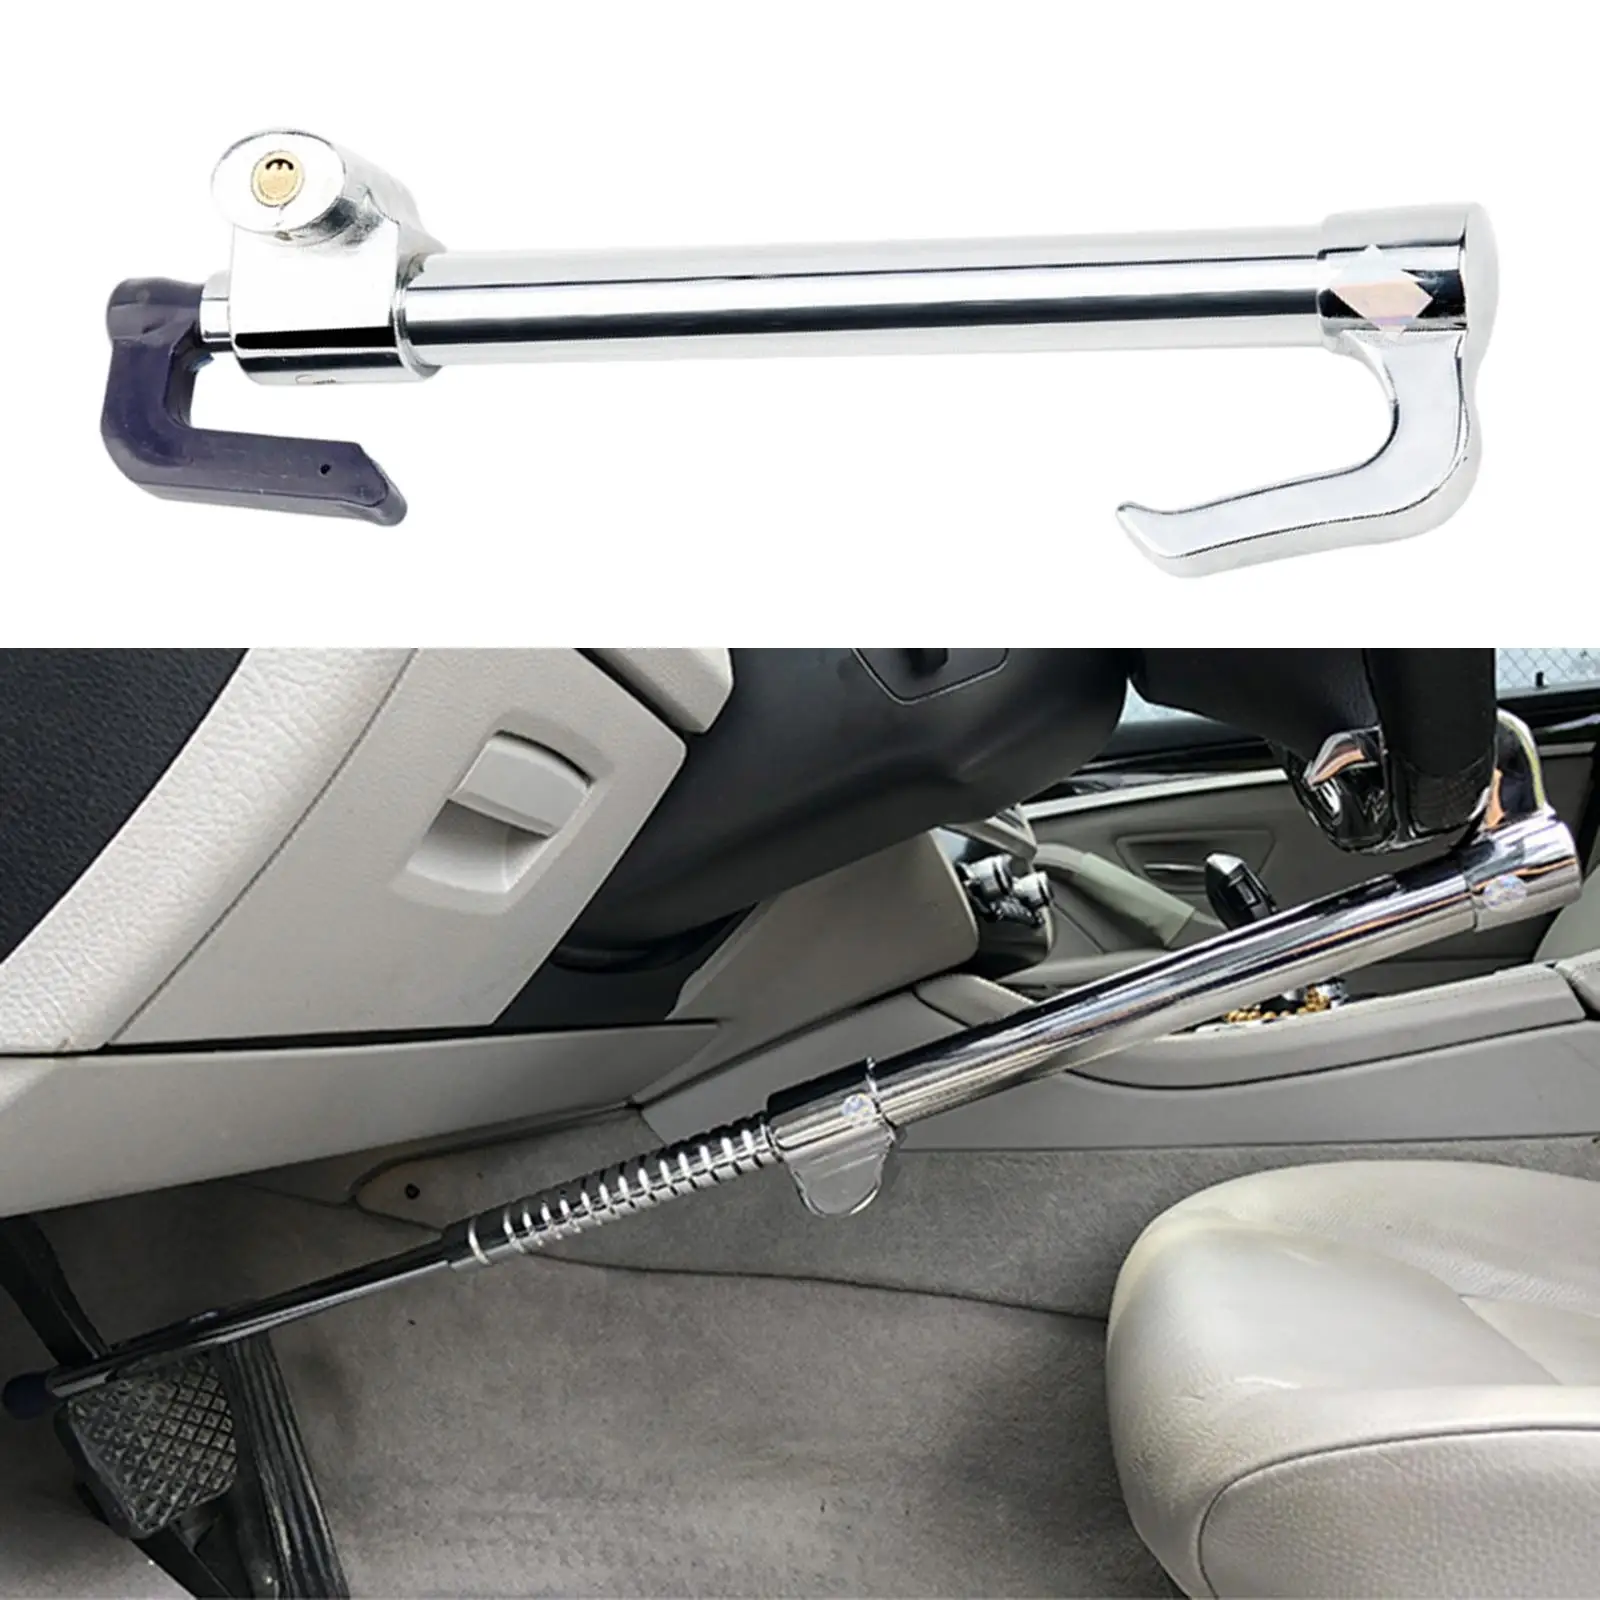 Universal Steering Wheel Lock Extendable Retractable for Car SUV 